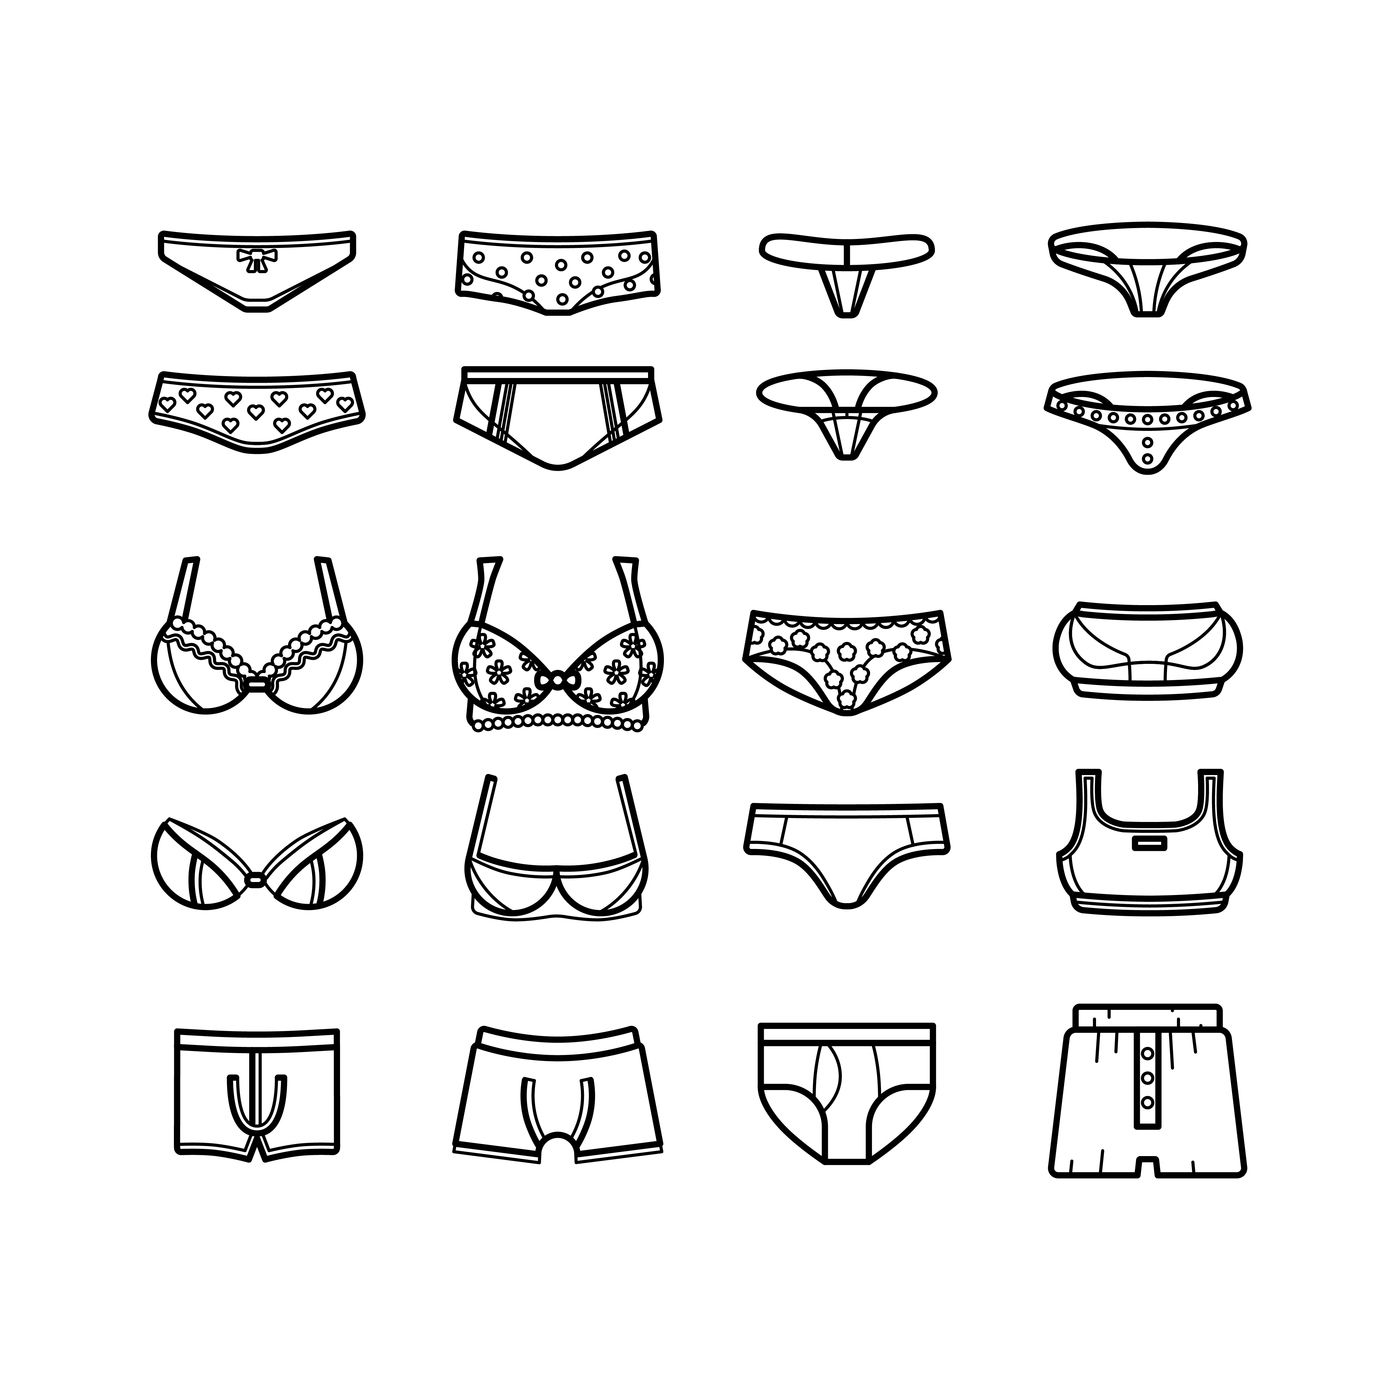 Lingerie womens and mens underwear thin line icons set By Microvector